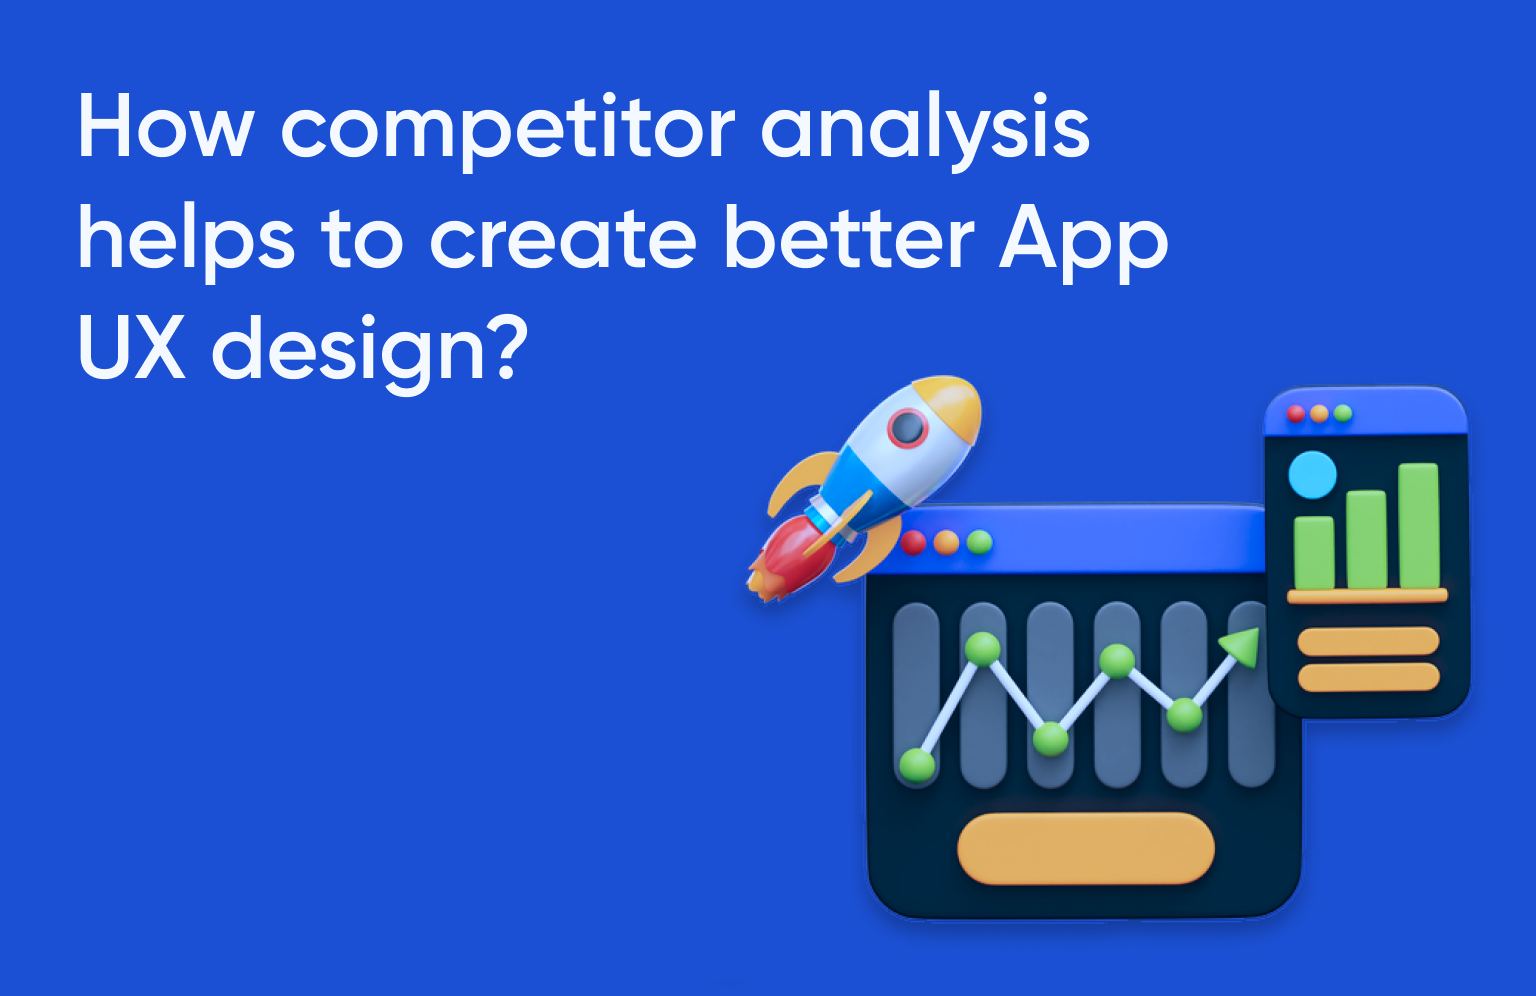 How competitor analysis helps in creating better App UX design?